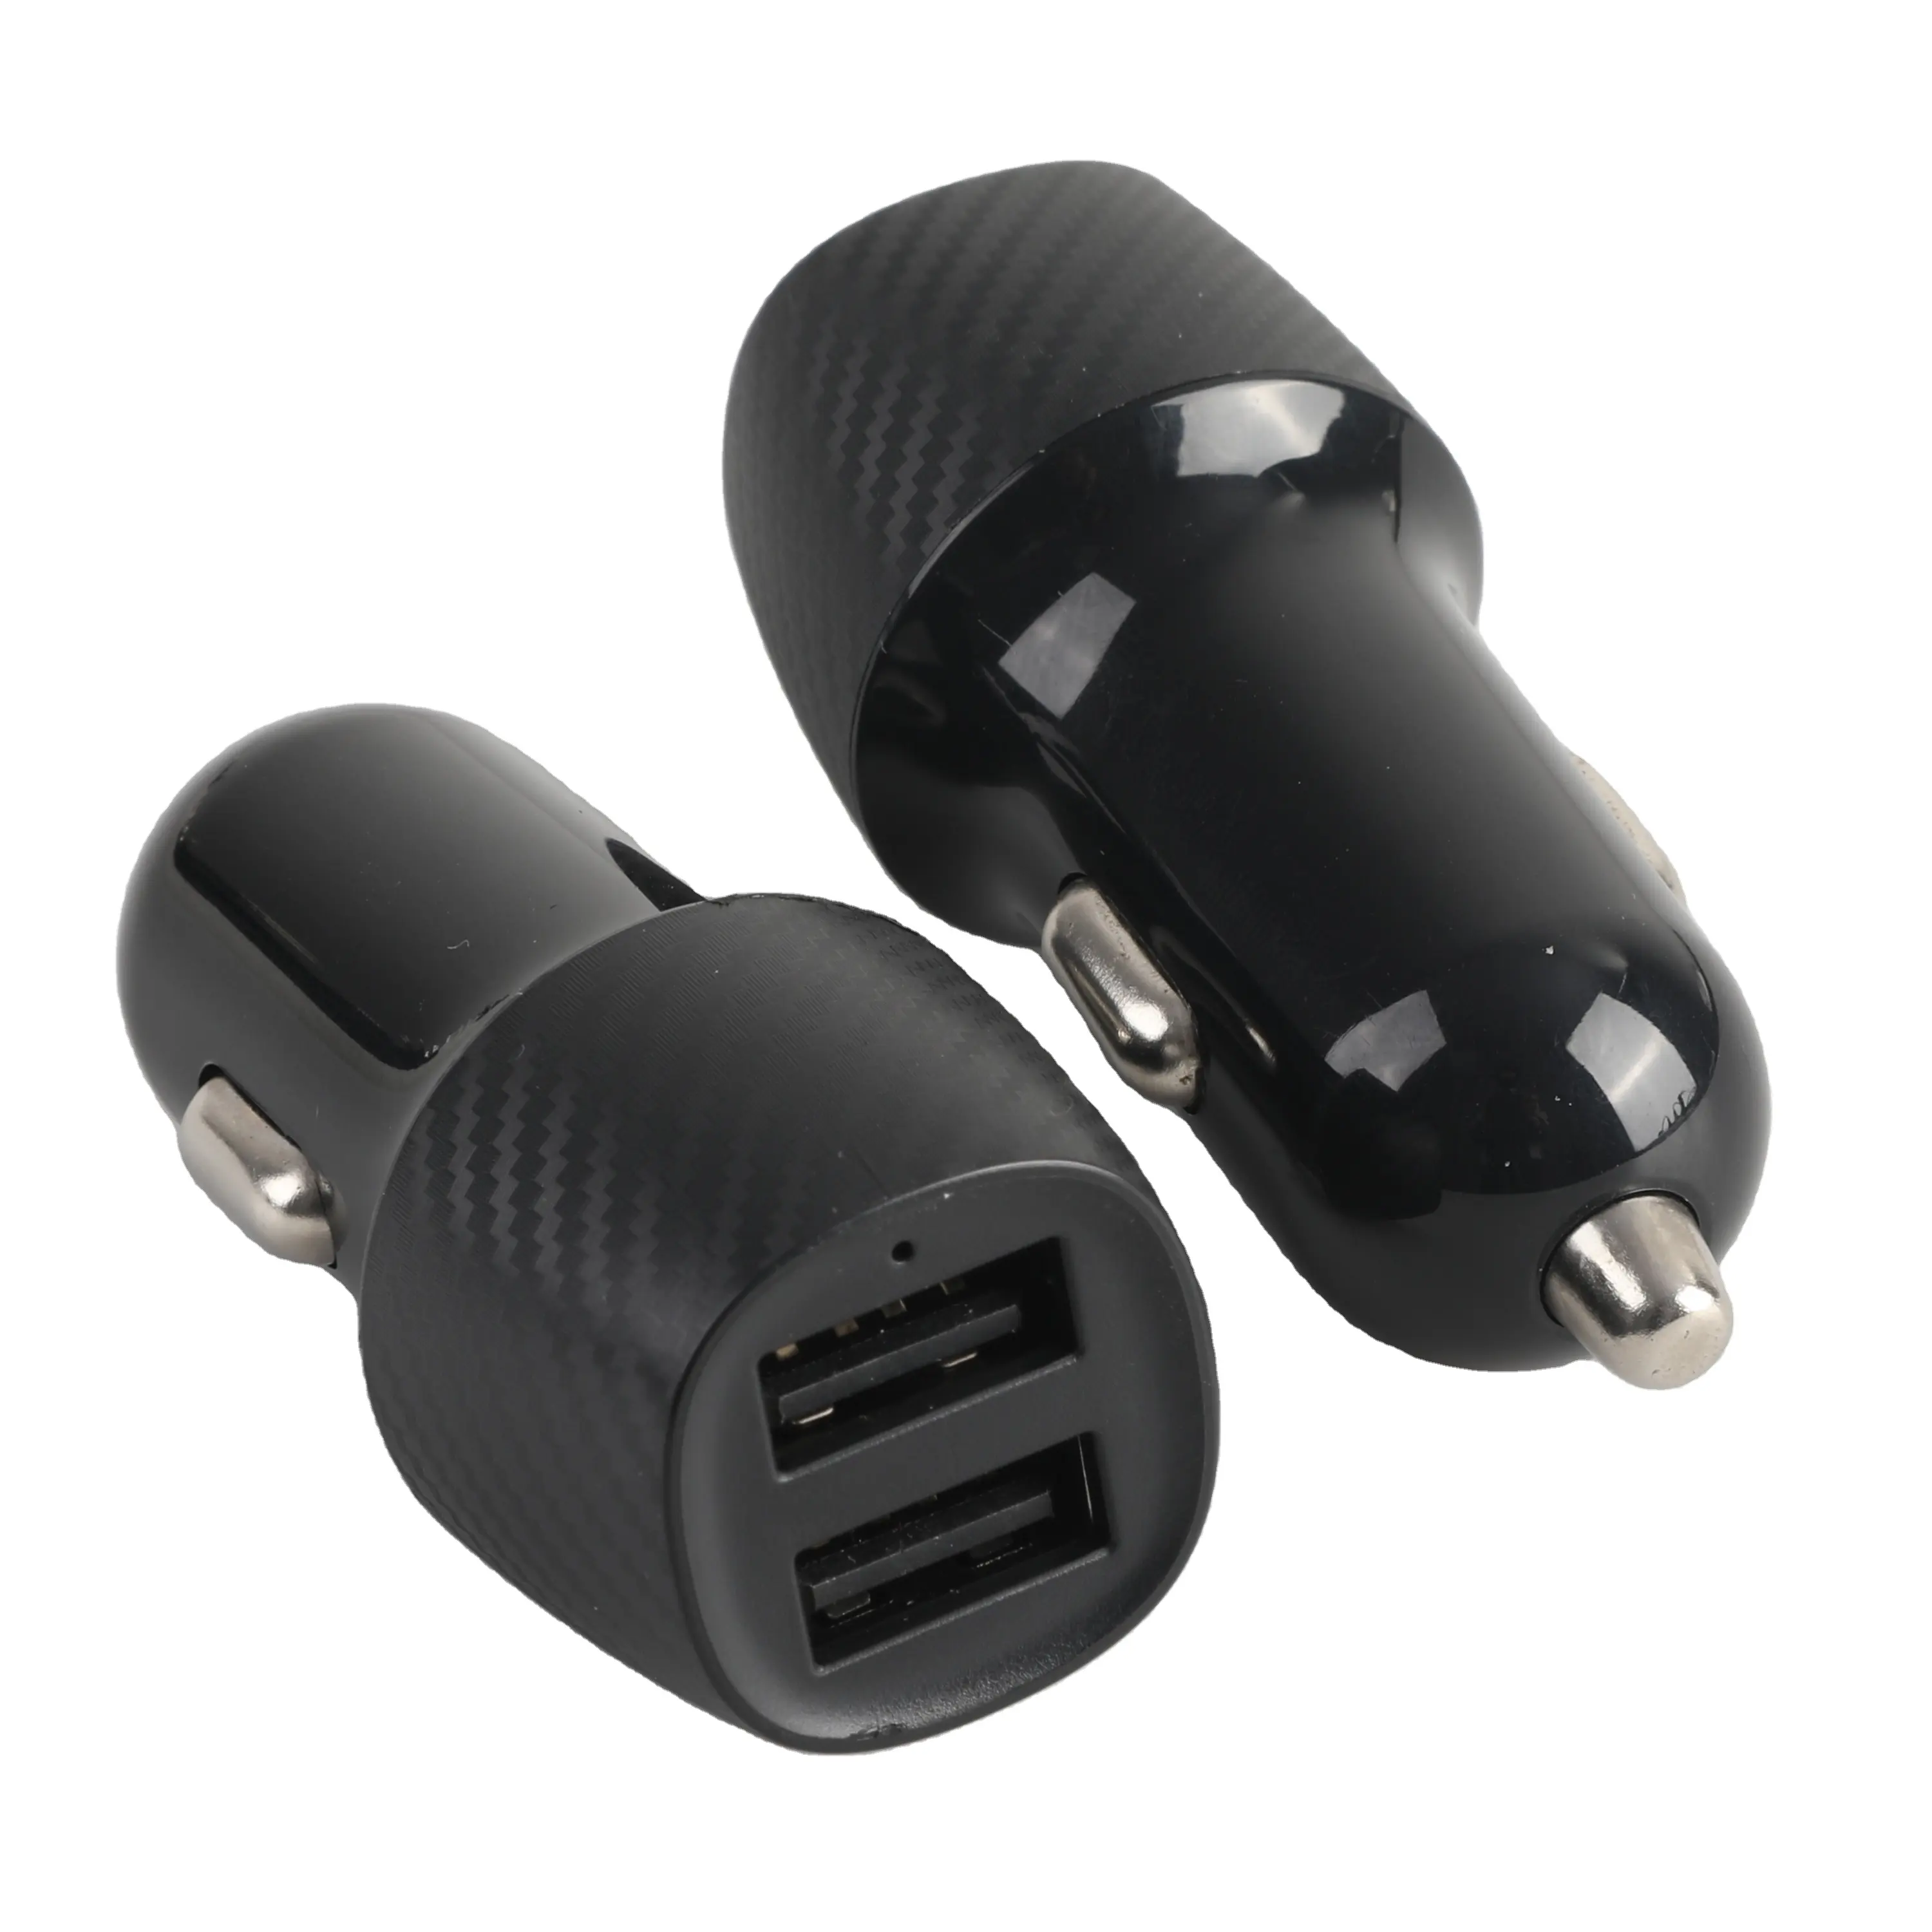 Sunda Mobile Phone Accessories Universal Wireless Dual USB 5V 4.8A Car Adapter Car Changing Charger for XiaoMi OPPO